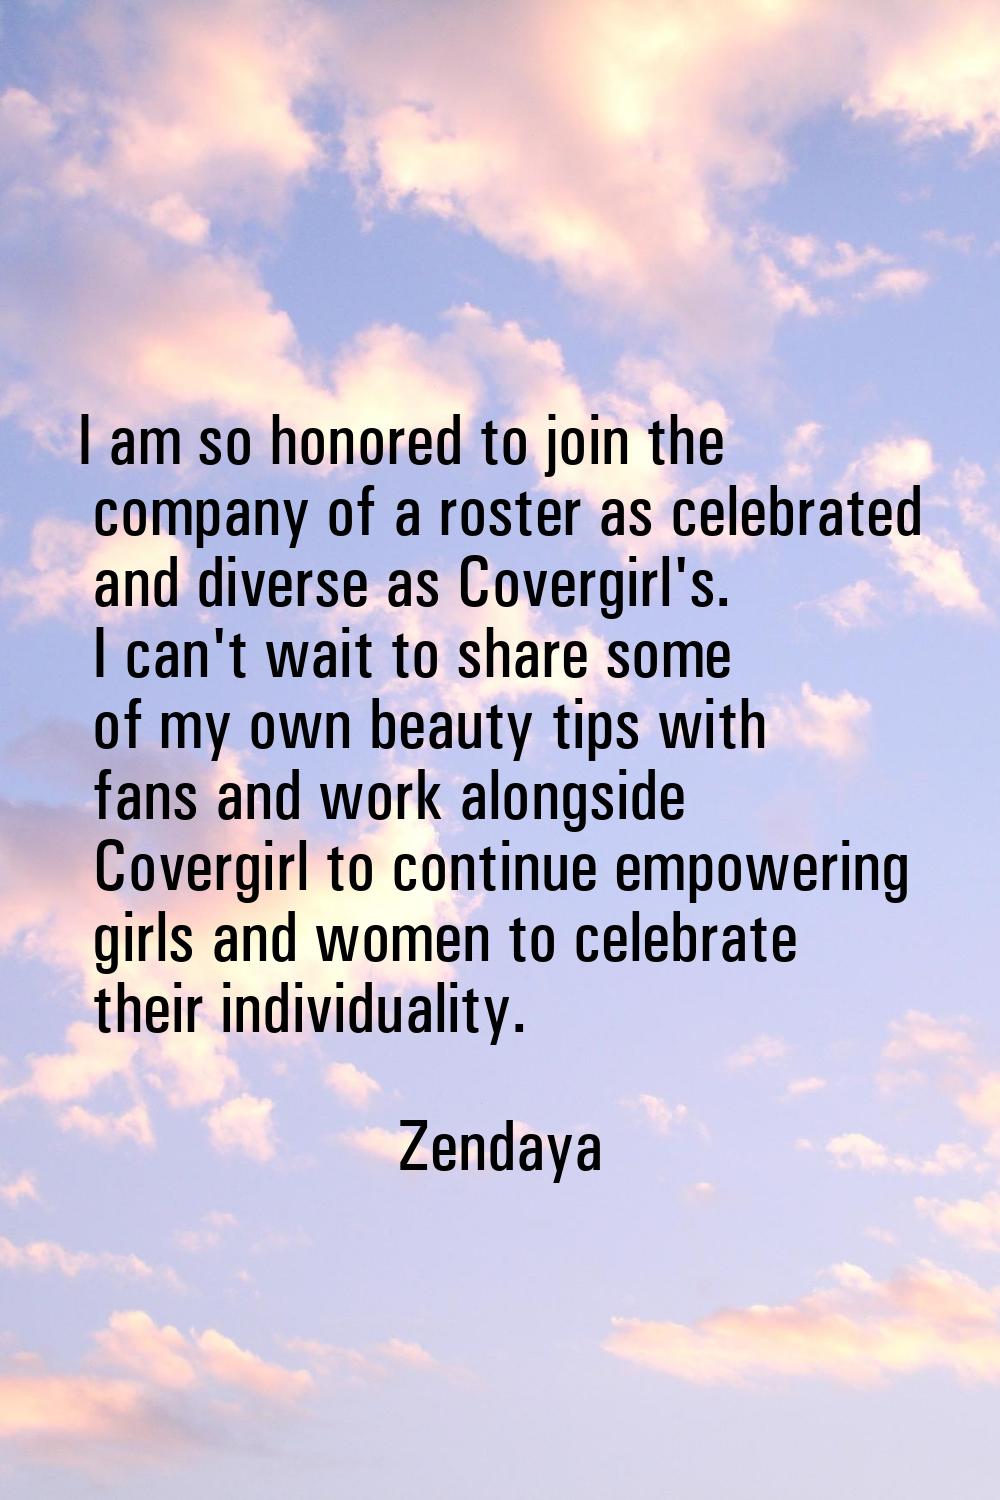 I am so honored to join the company of a roster as celebrated and diverse as Covergirl's. I can't w